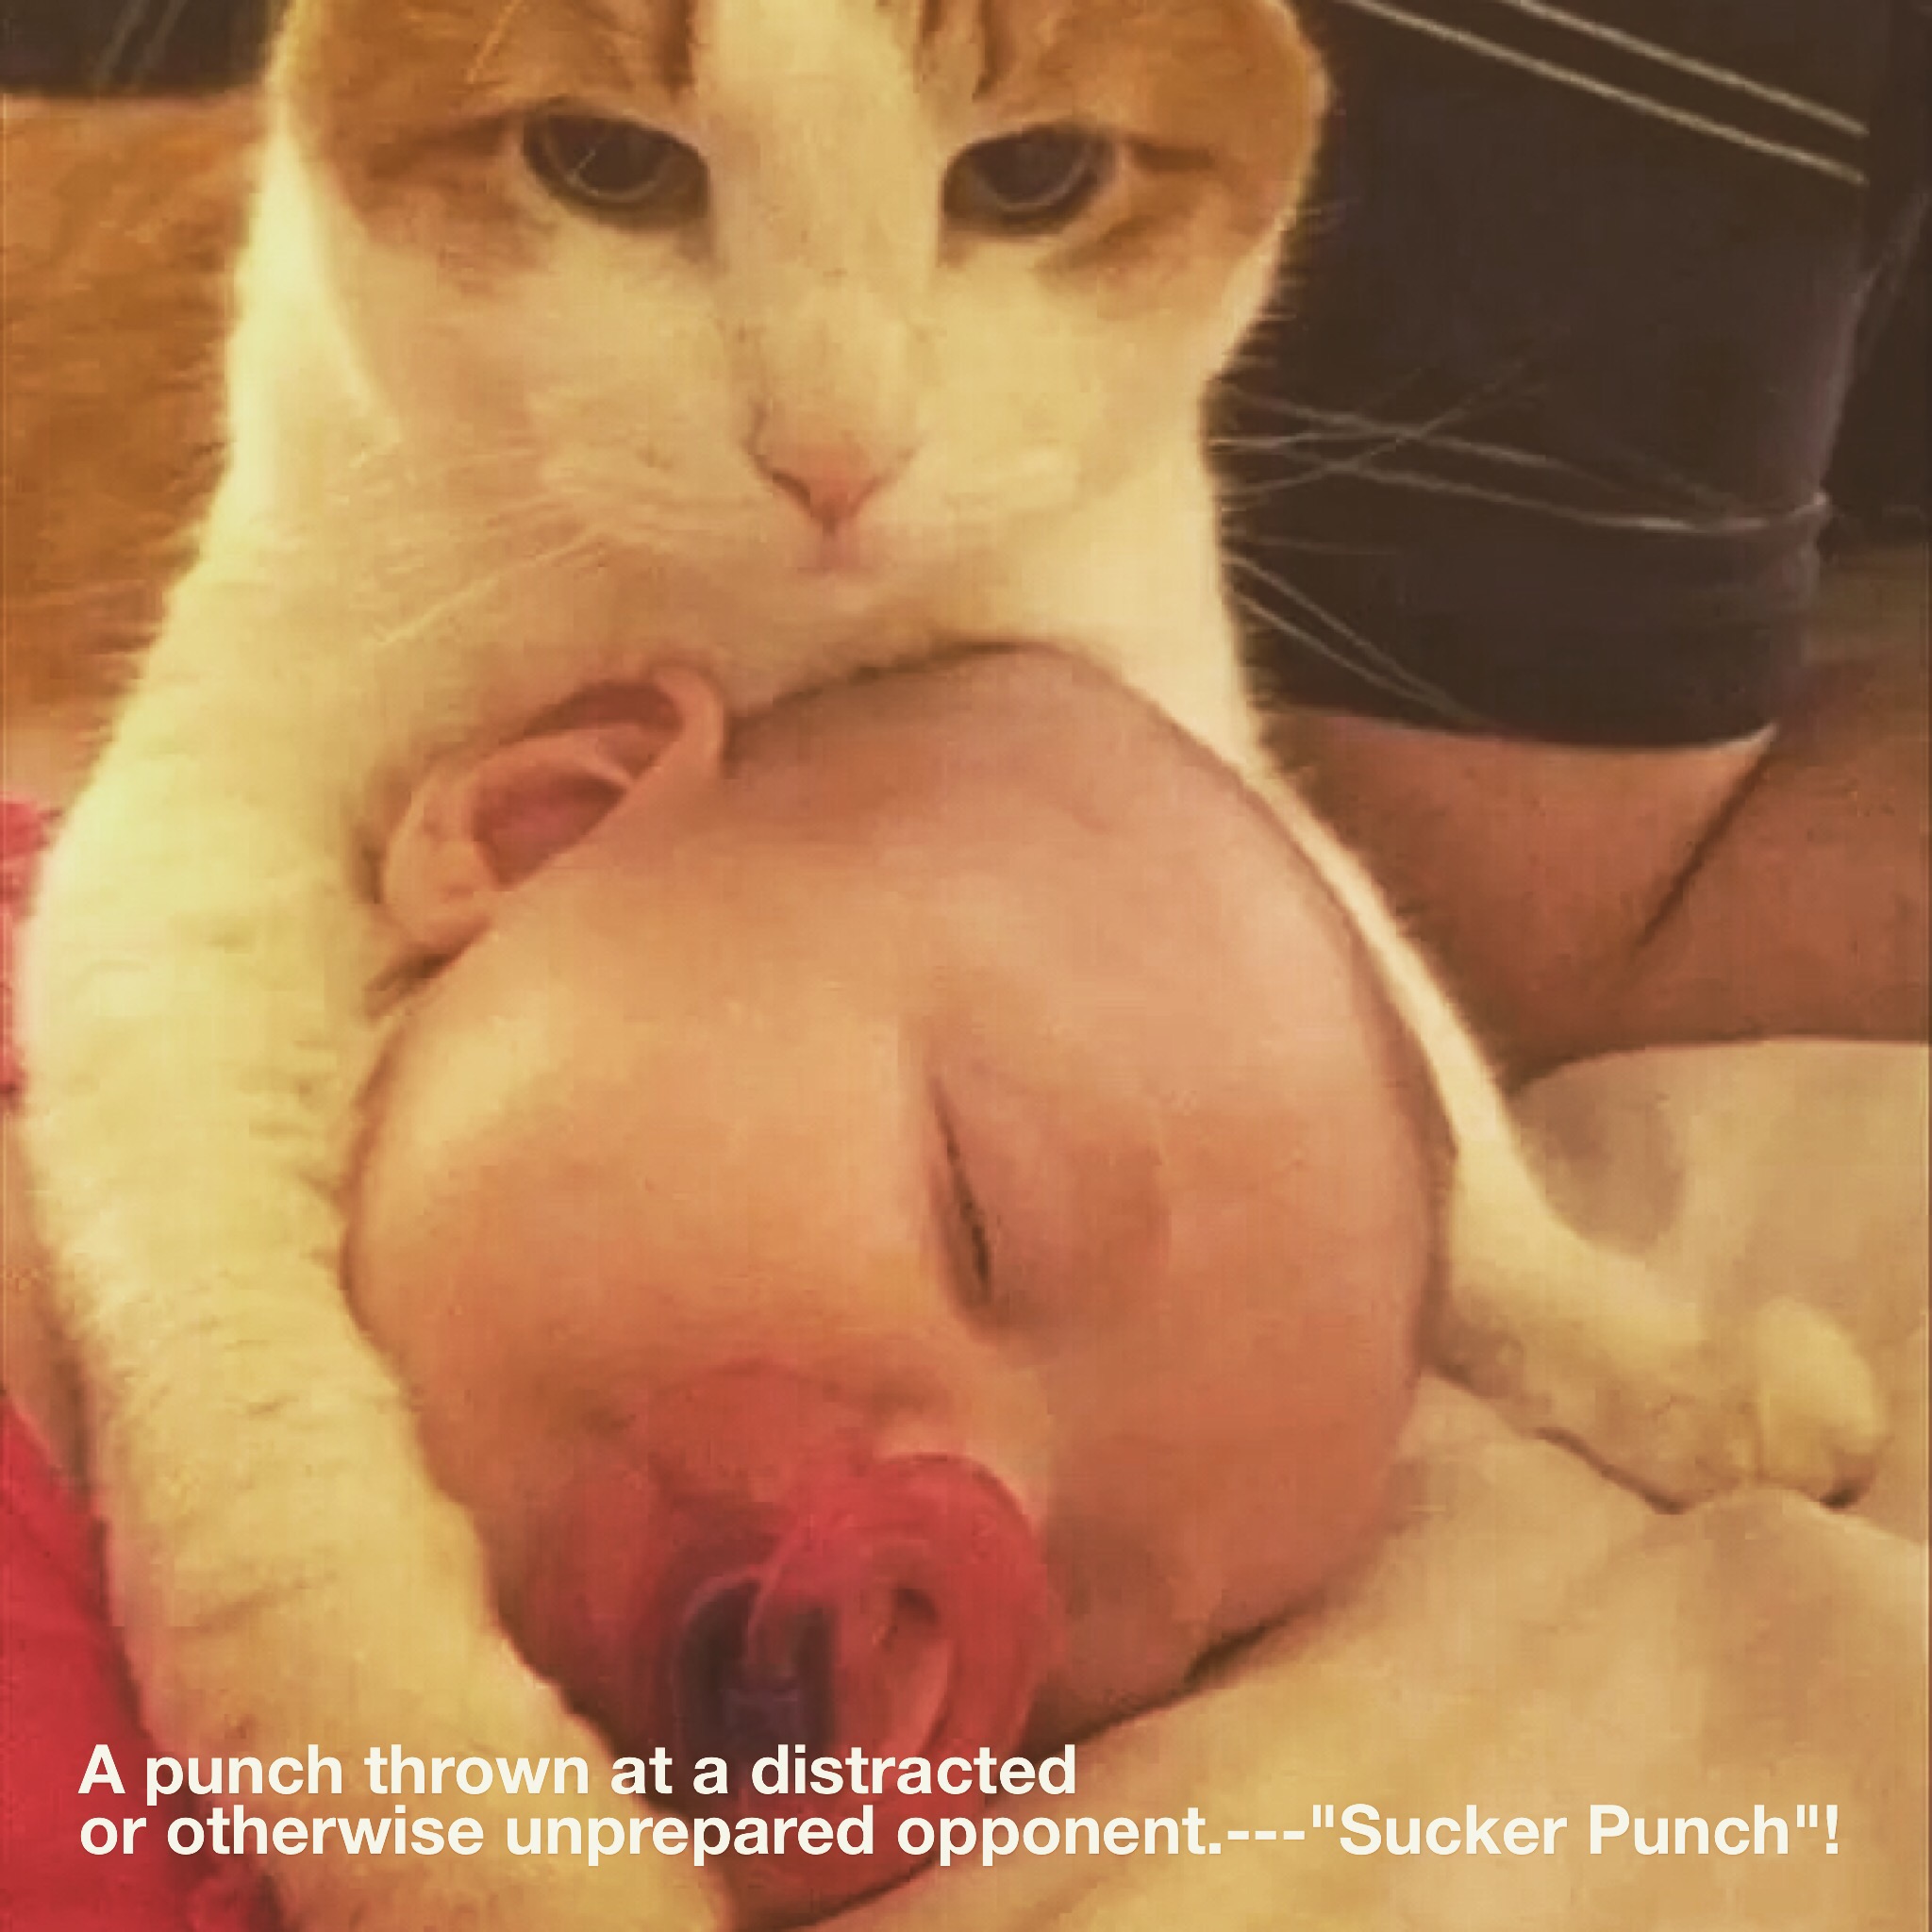 A punch thrown at a distracted or otherwise unprepared opponent.—“Sucker Punch” The Trainer 